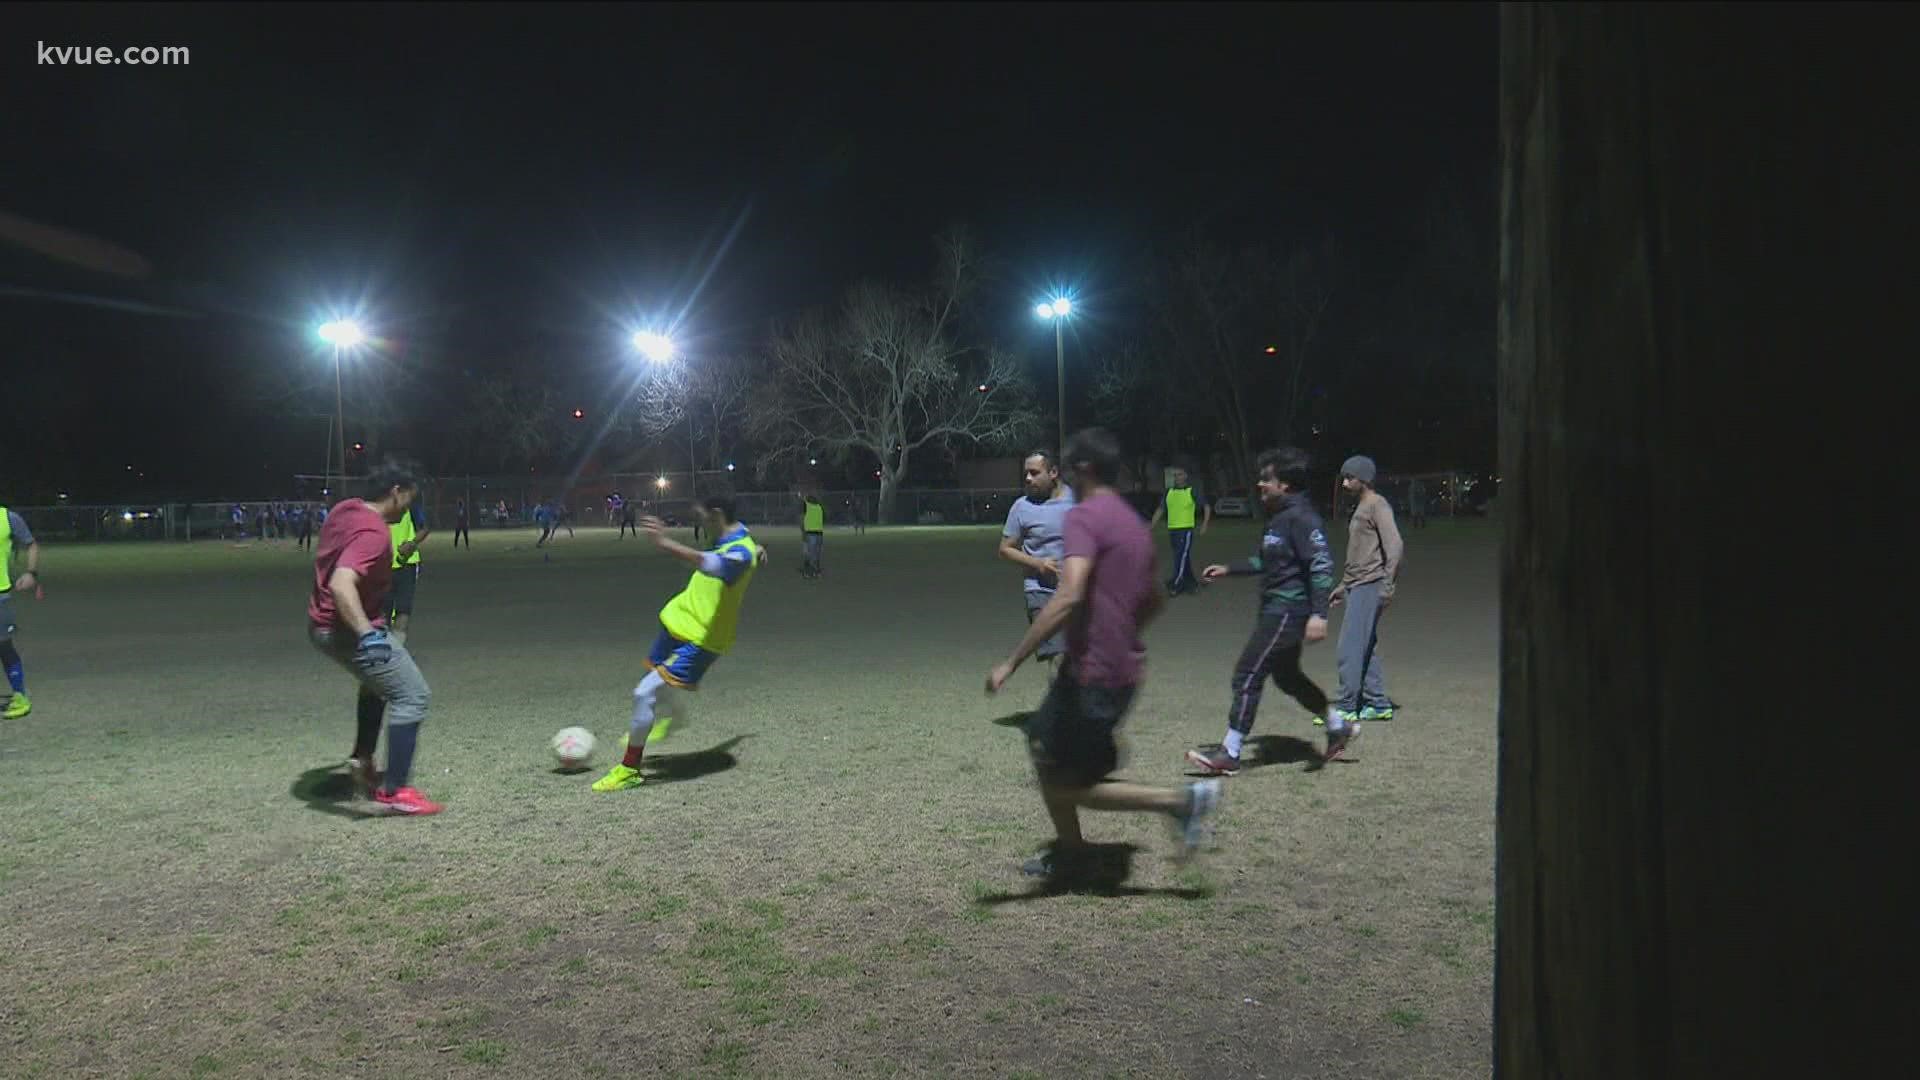 Afghan refugees are finding community in playing soccer together, thousands of miles from their homeland.